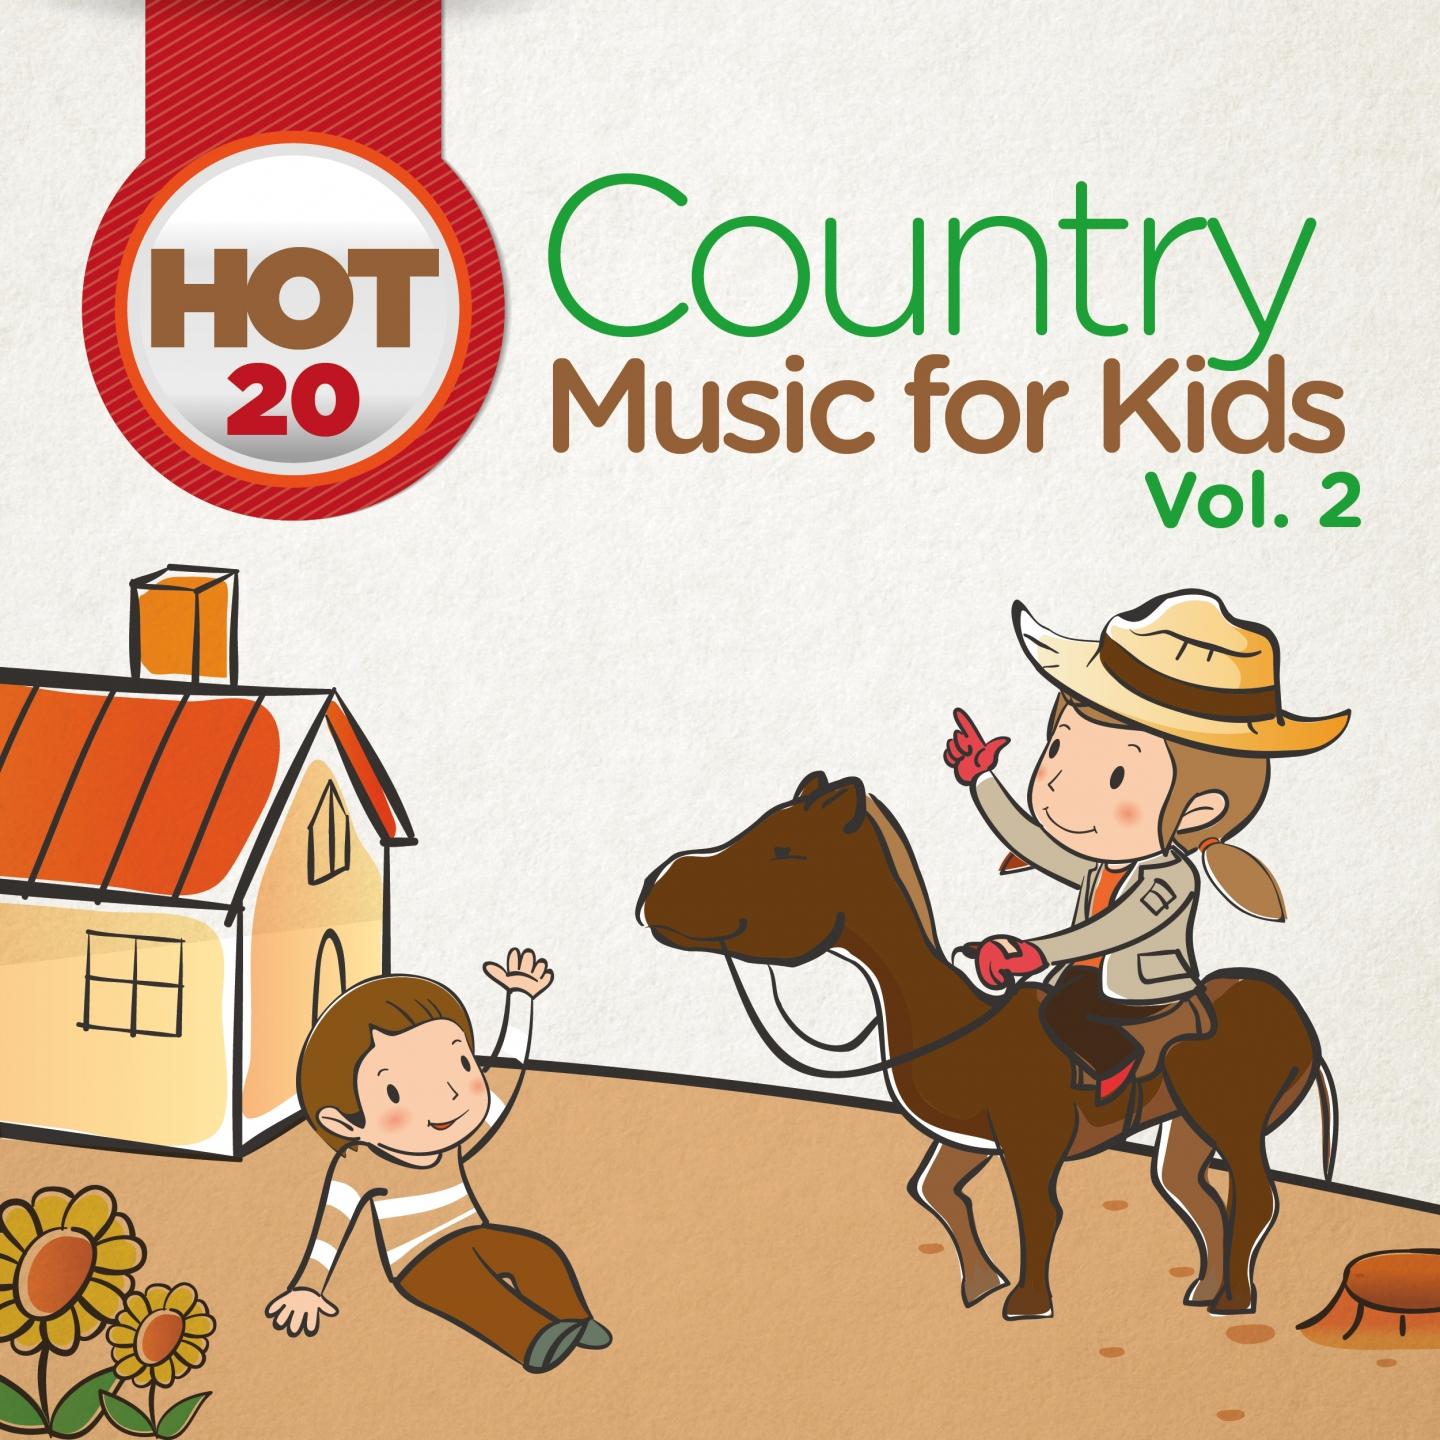 Hot 20: Country Music for Kids, Vol. 2